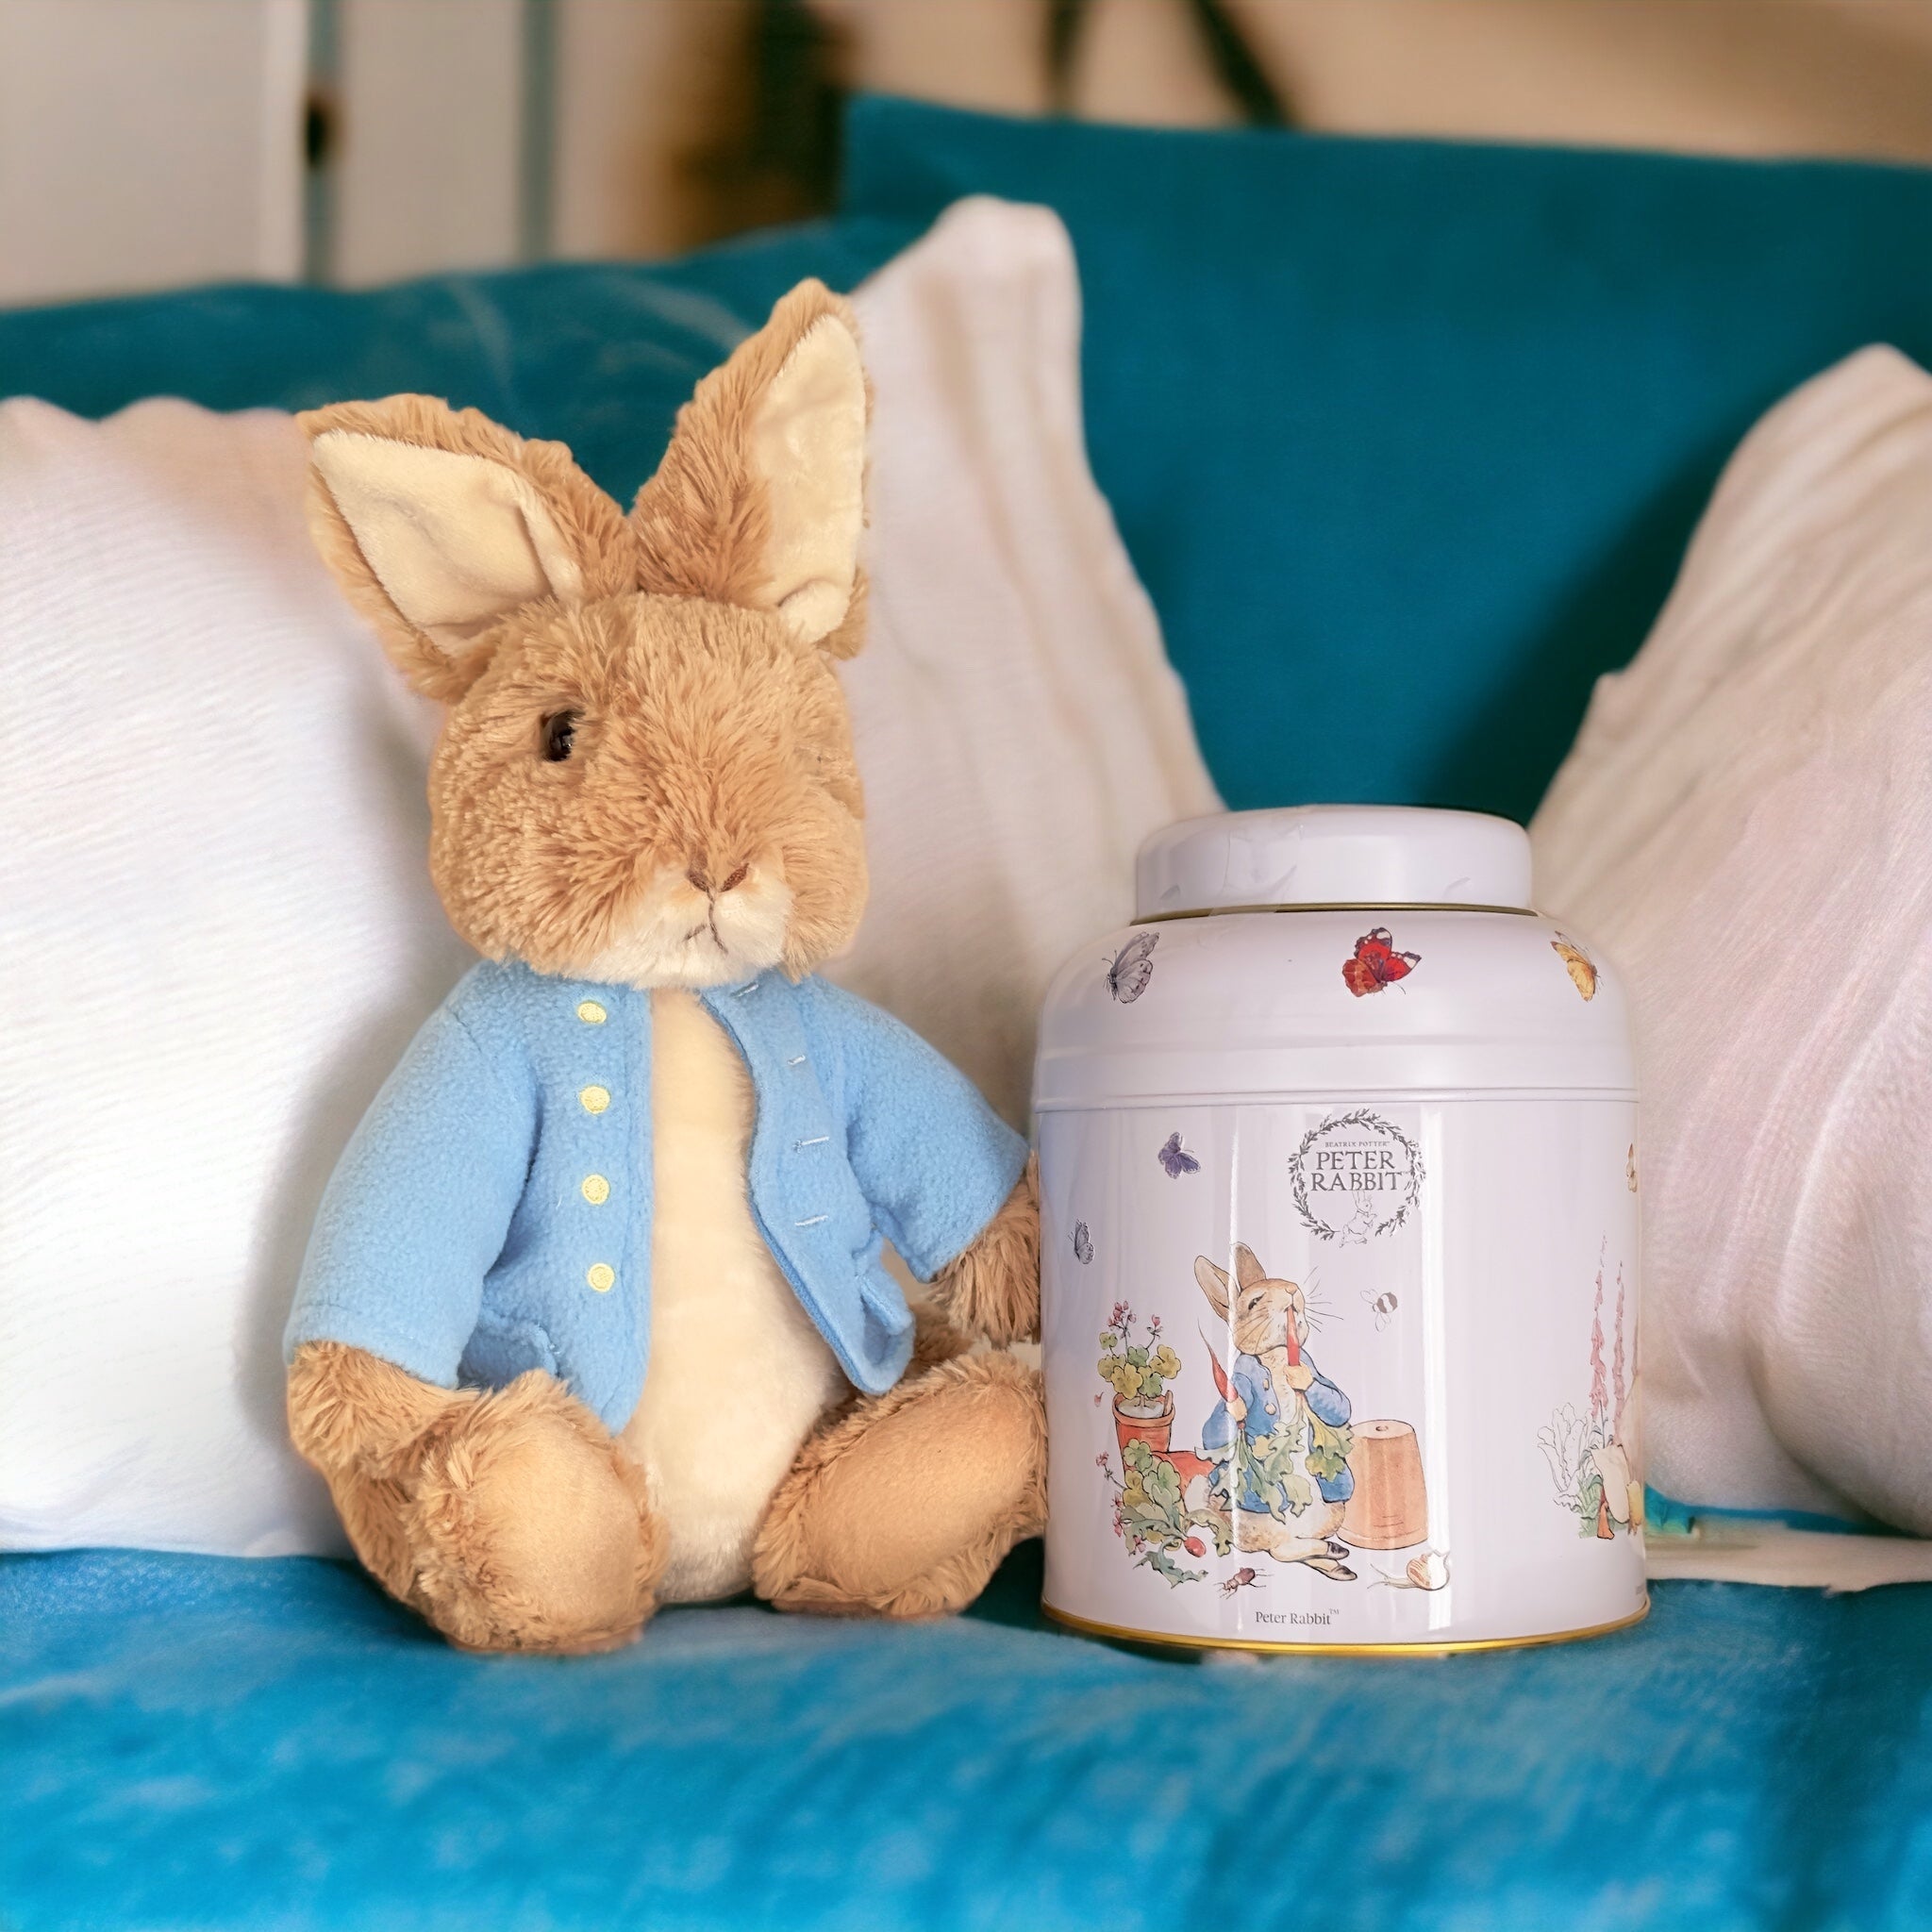 Official Beatrix Potter Peter Rabbit Gift Set with Tea Caddy and Plush Toy